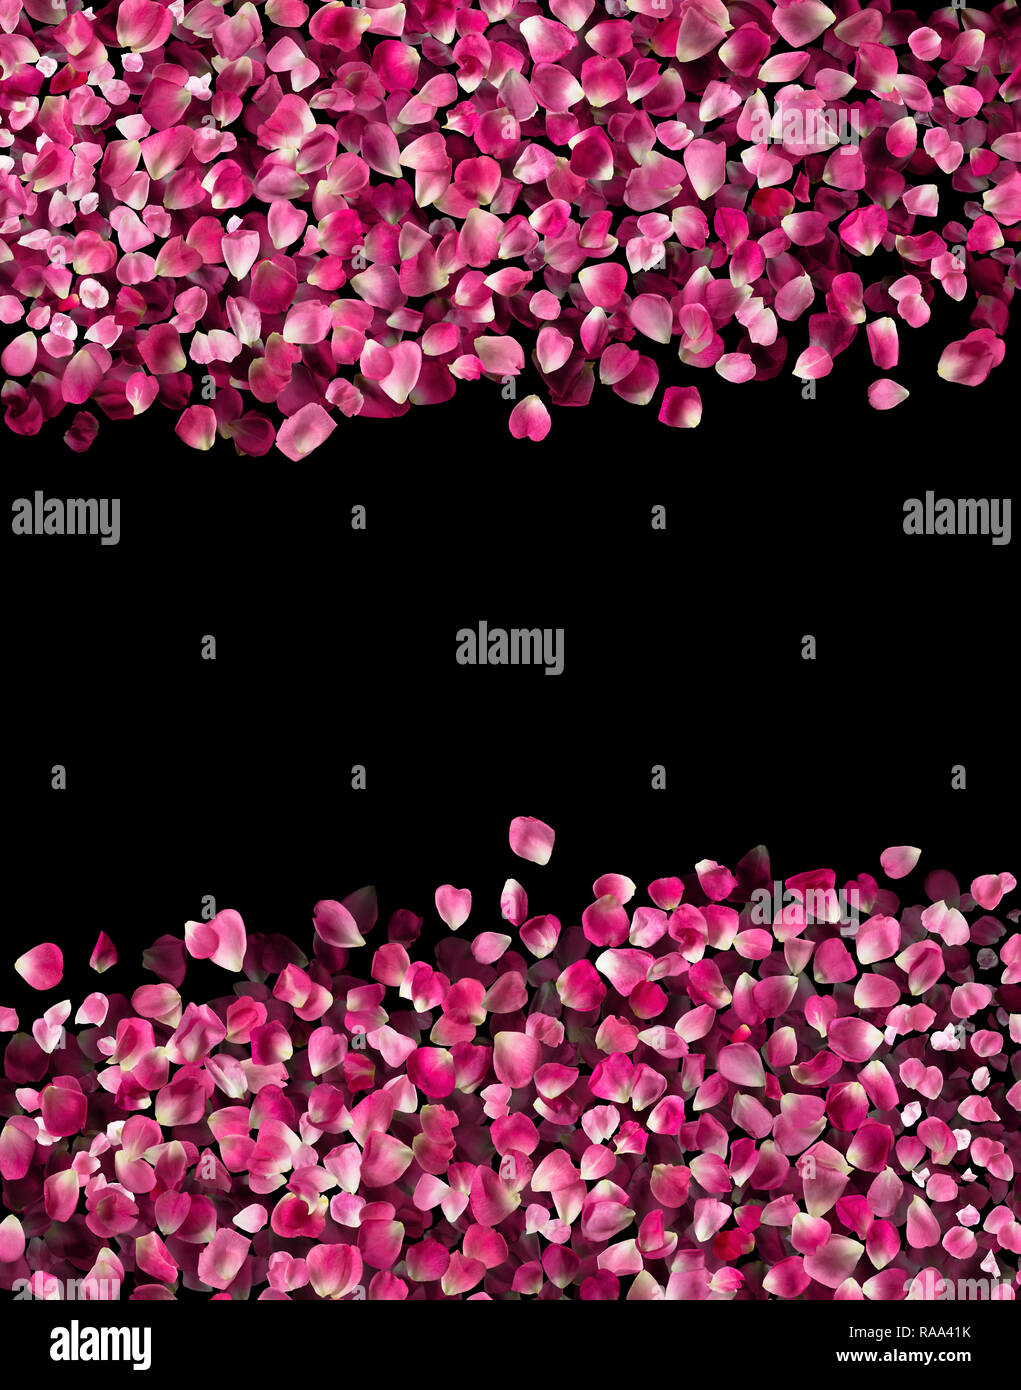 Rosa rose petals floating on a blank banner, each studio photographed and isolated on absolute black Stock Photo